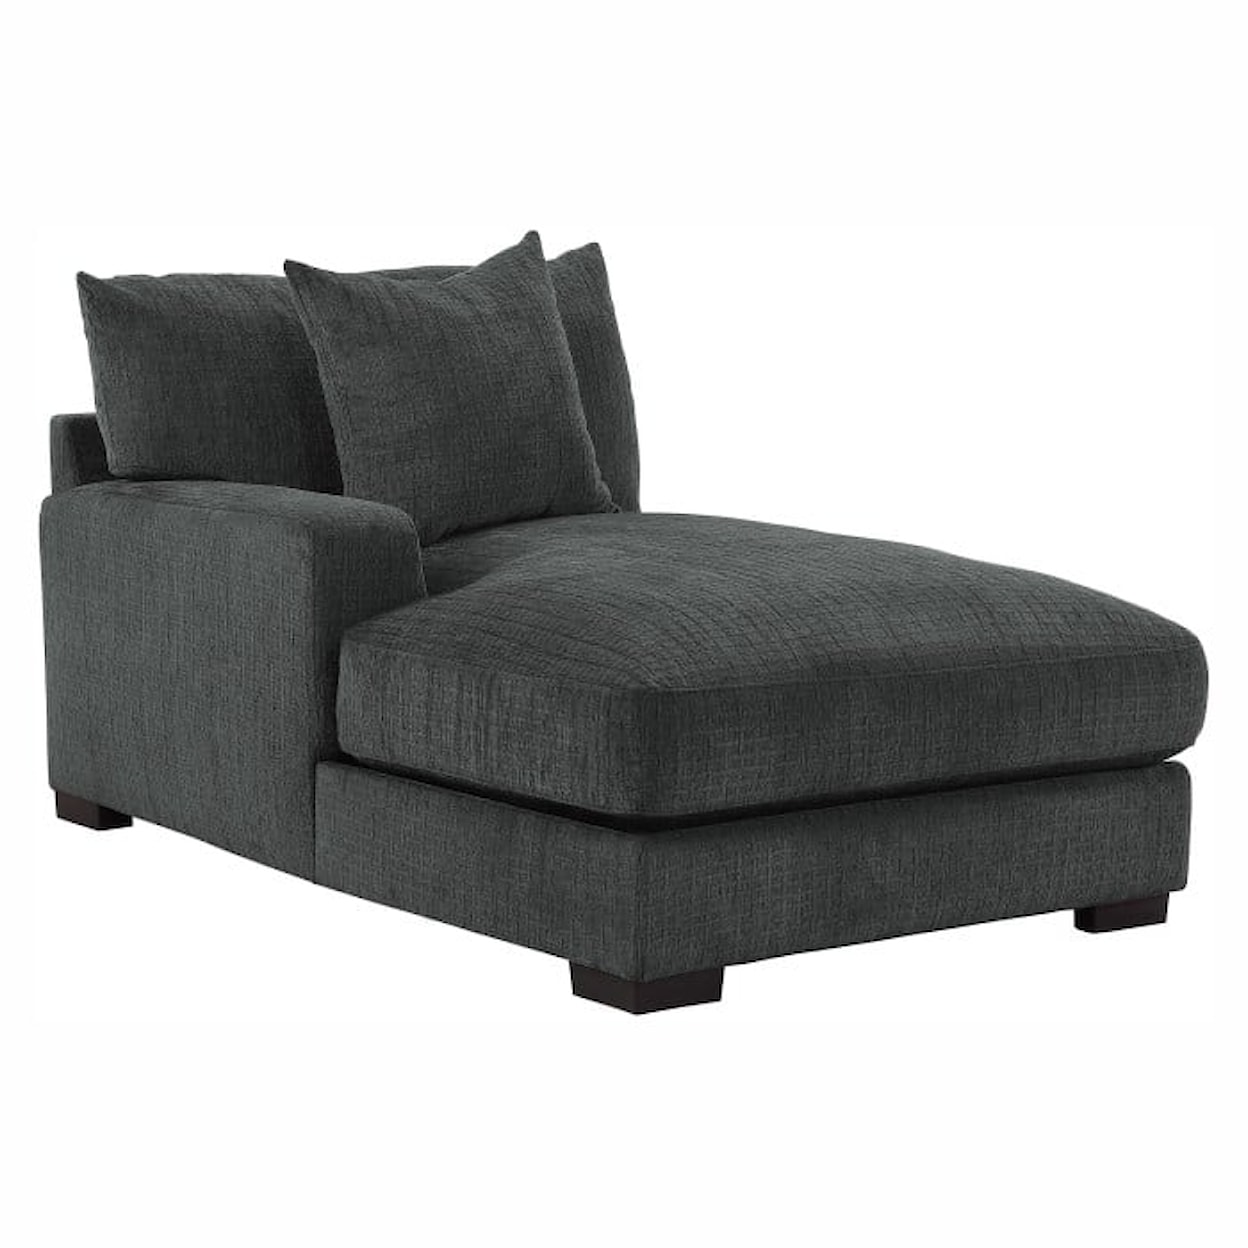 Homelegance Furniture Worchester Left Side Chaise